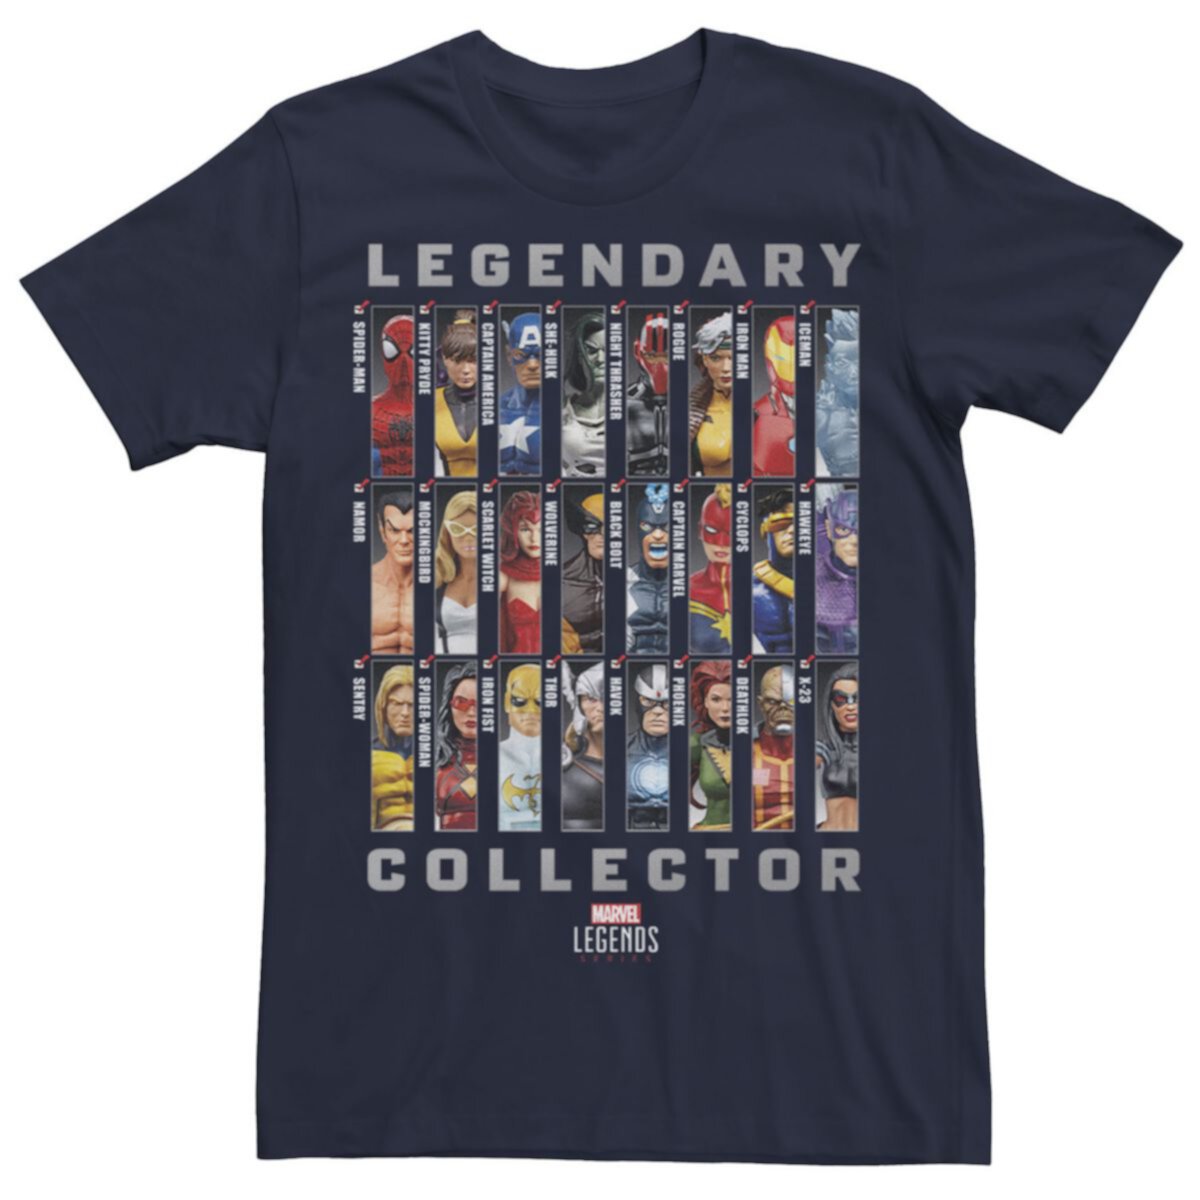 Legendary collection